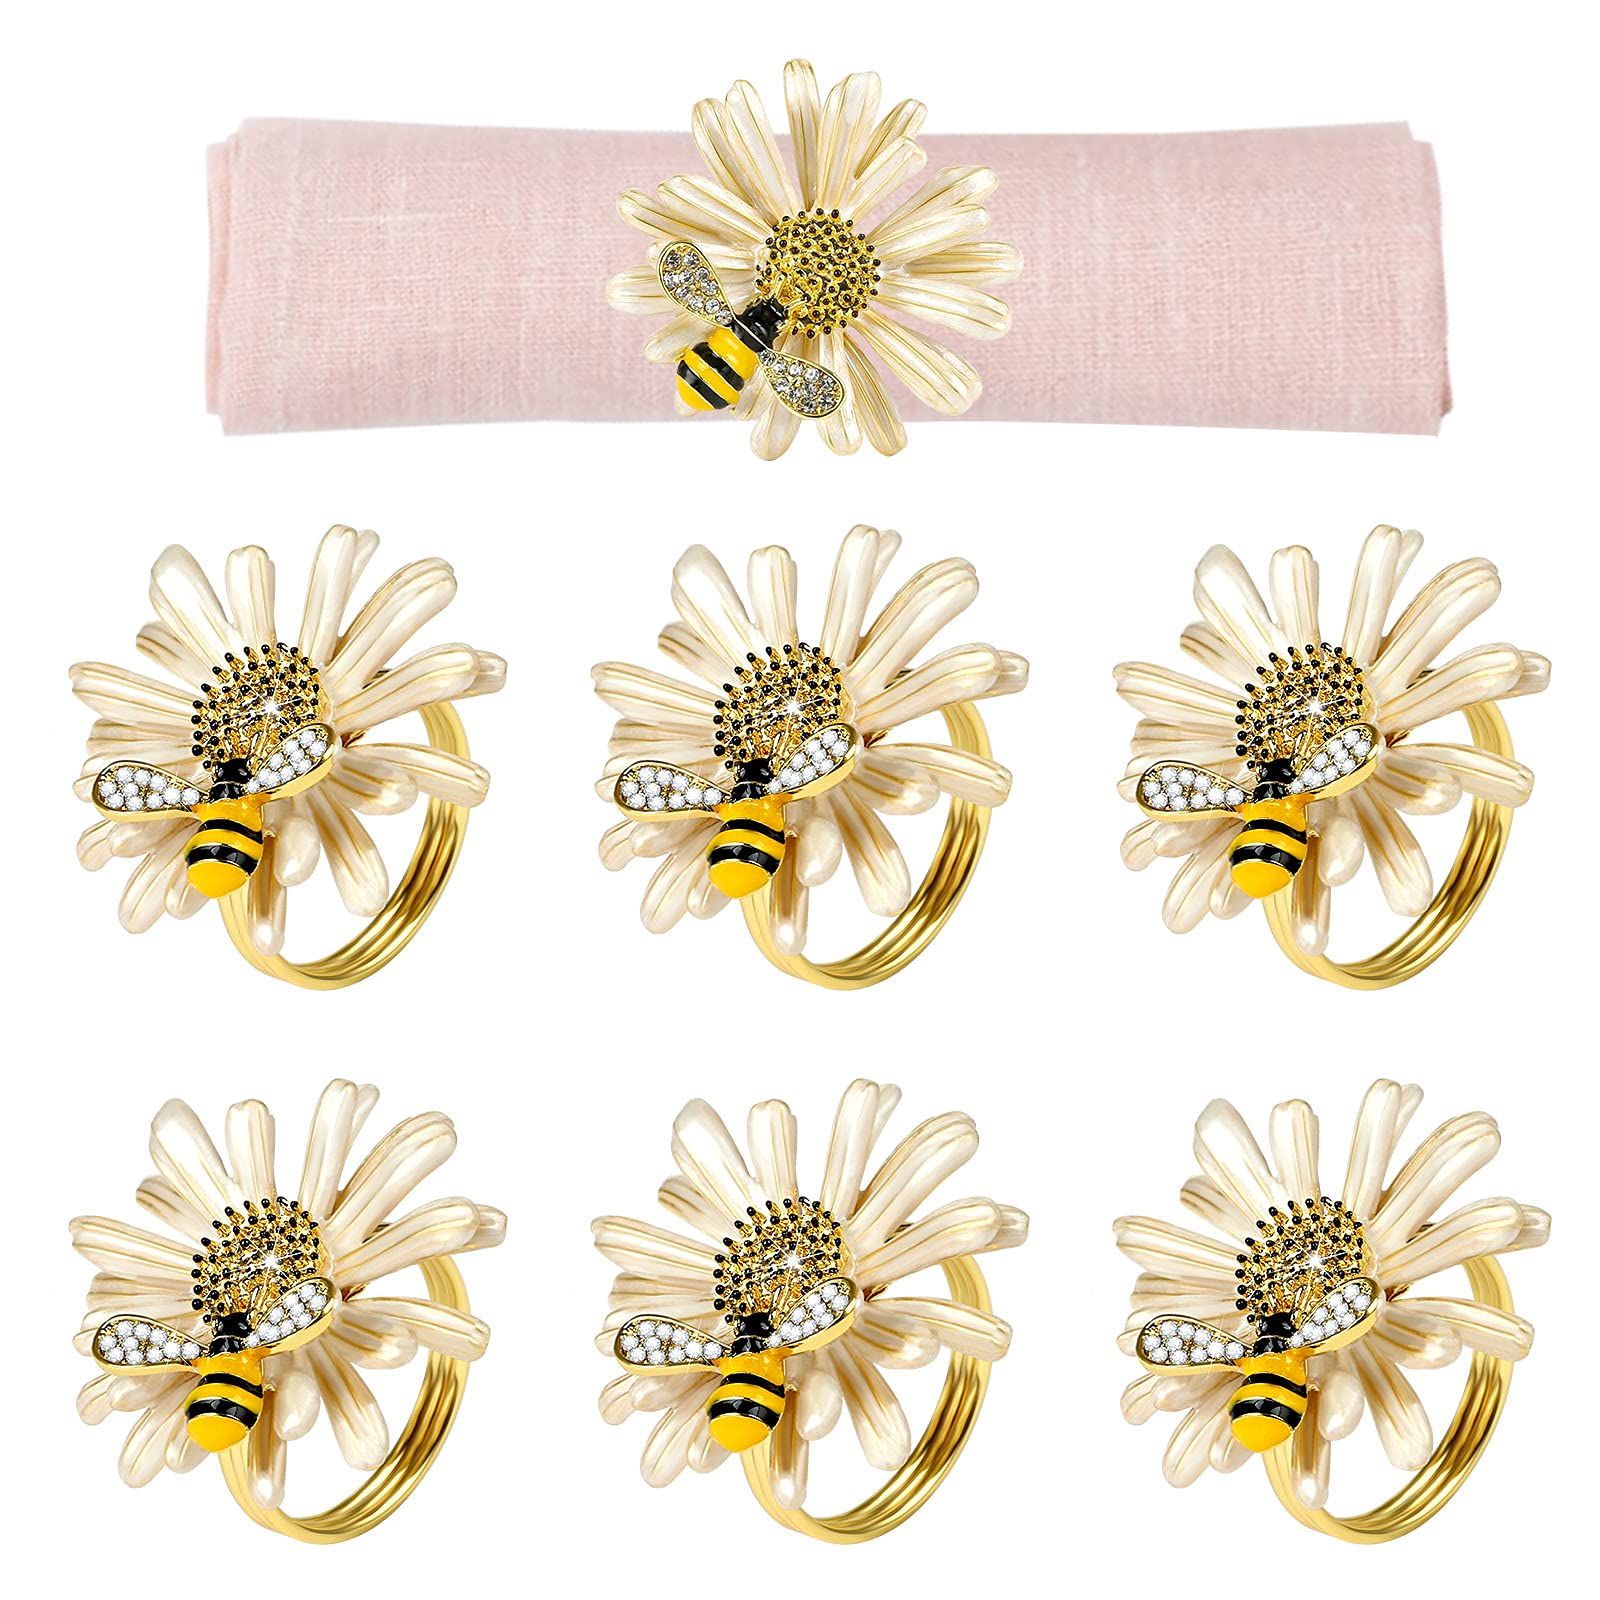 Kesote Daisy Sunflower Napkin Rings Set of 6, Gold Bee Napkin Ring Holders for Formal or Casual D... | Amazon (US)